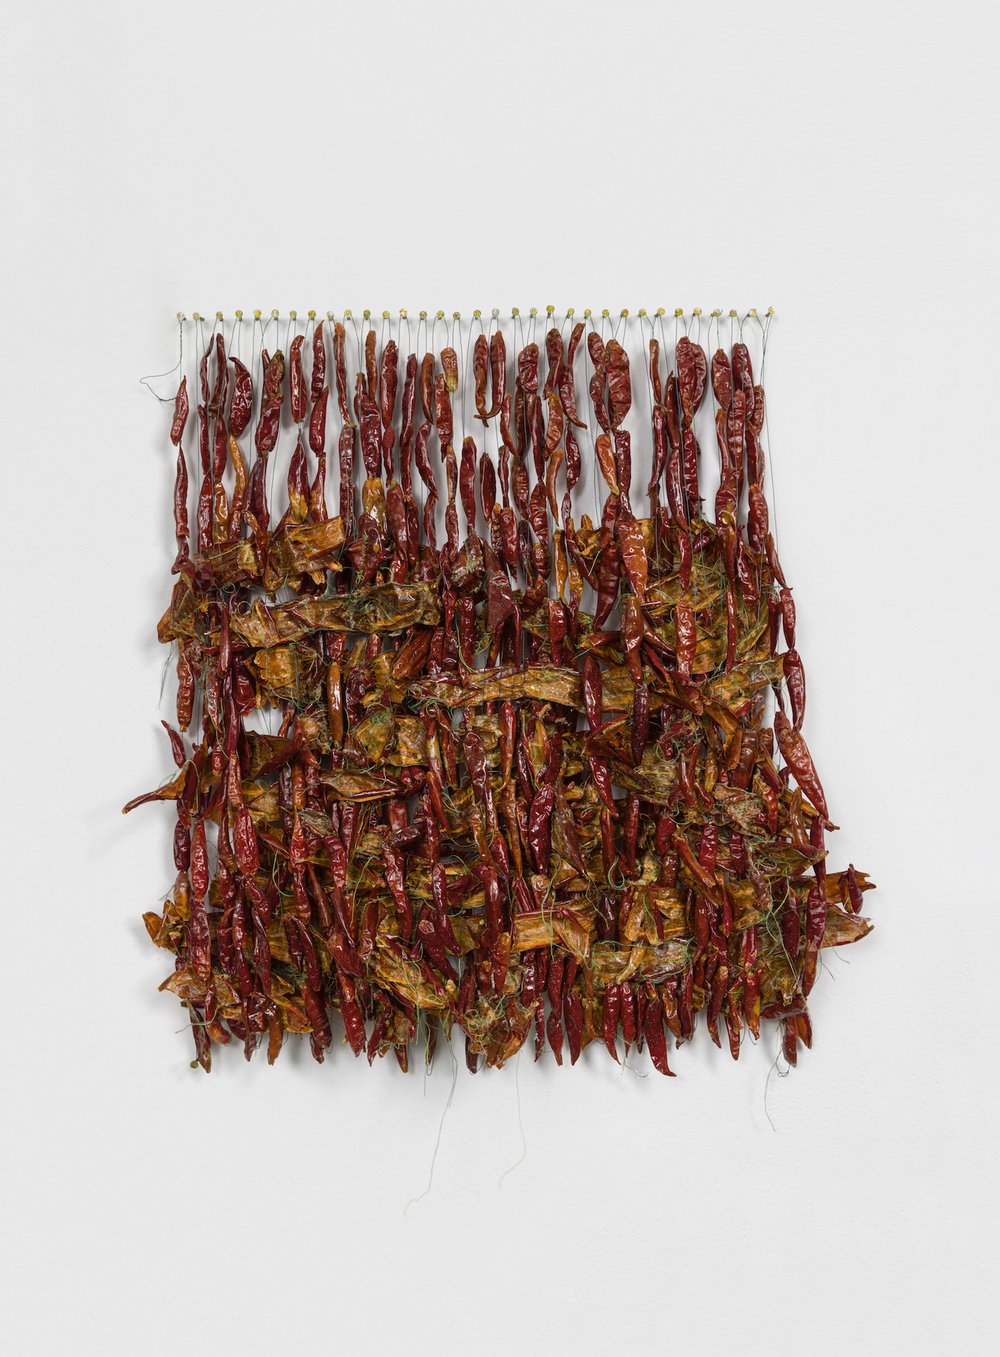  Zoila Andrea Coc-Chang,  aguas! , 2021, Dried chili peppers, thread, glitter, floral wire and nails on wall, 20 x 17 x 2 inches. Photo: Etienne Frossard. 